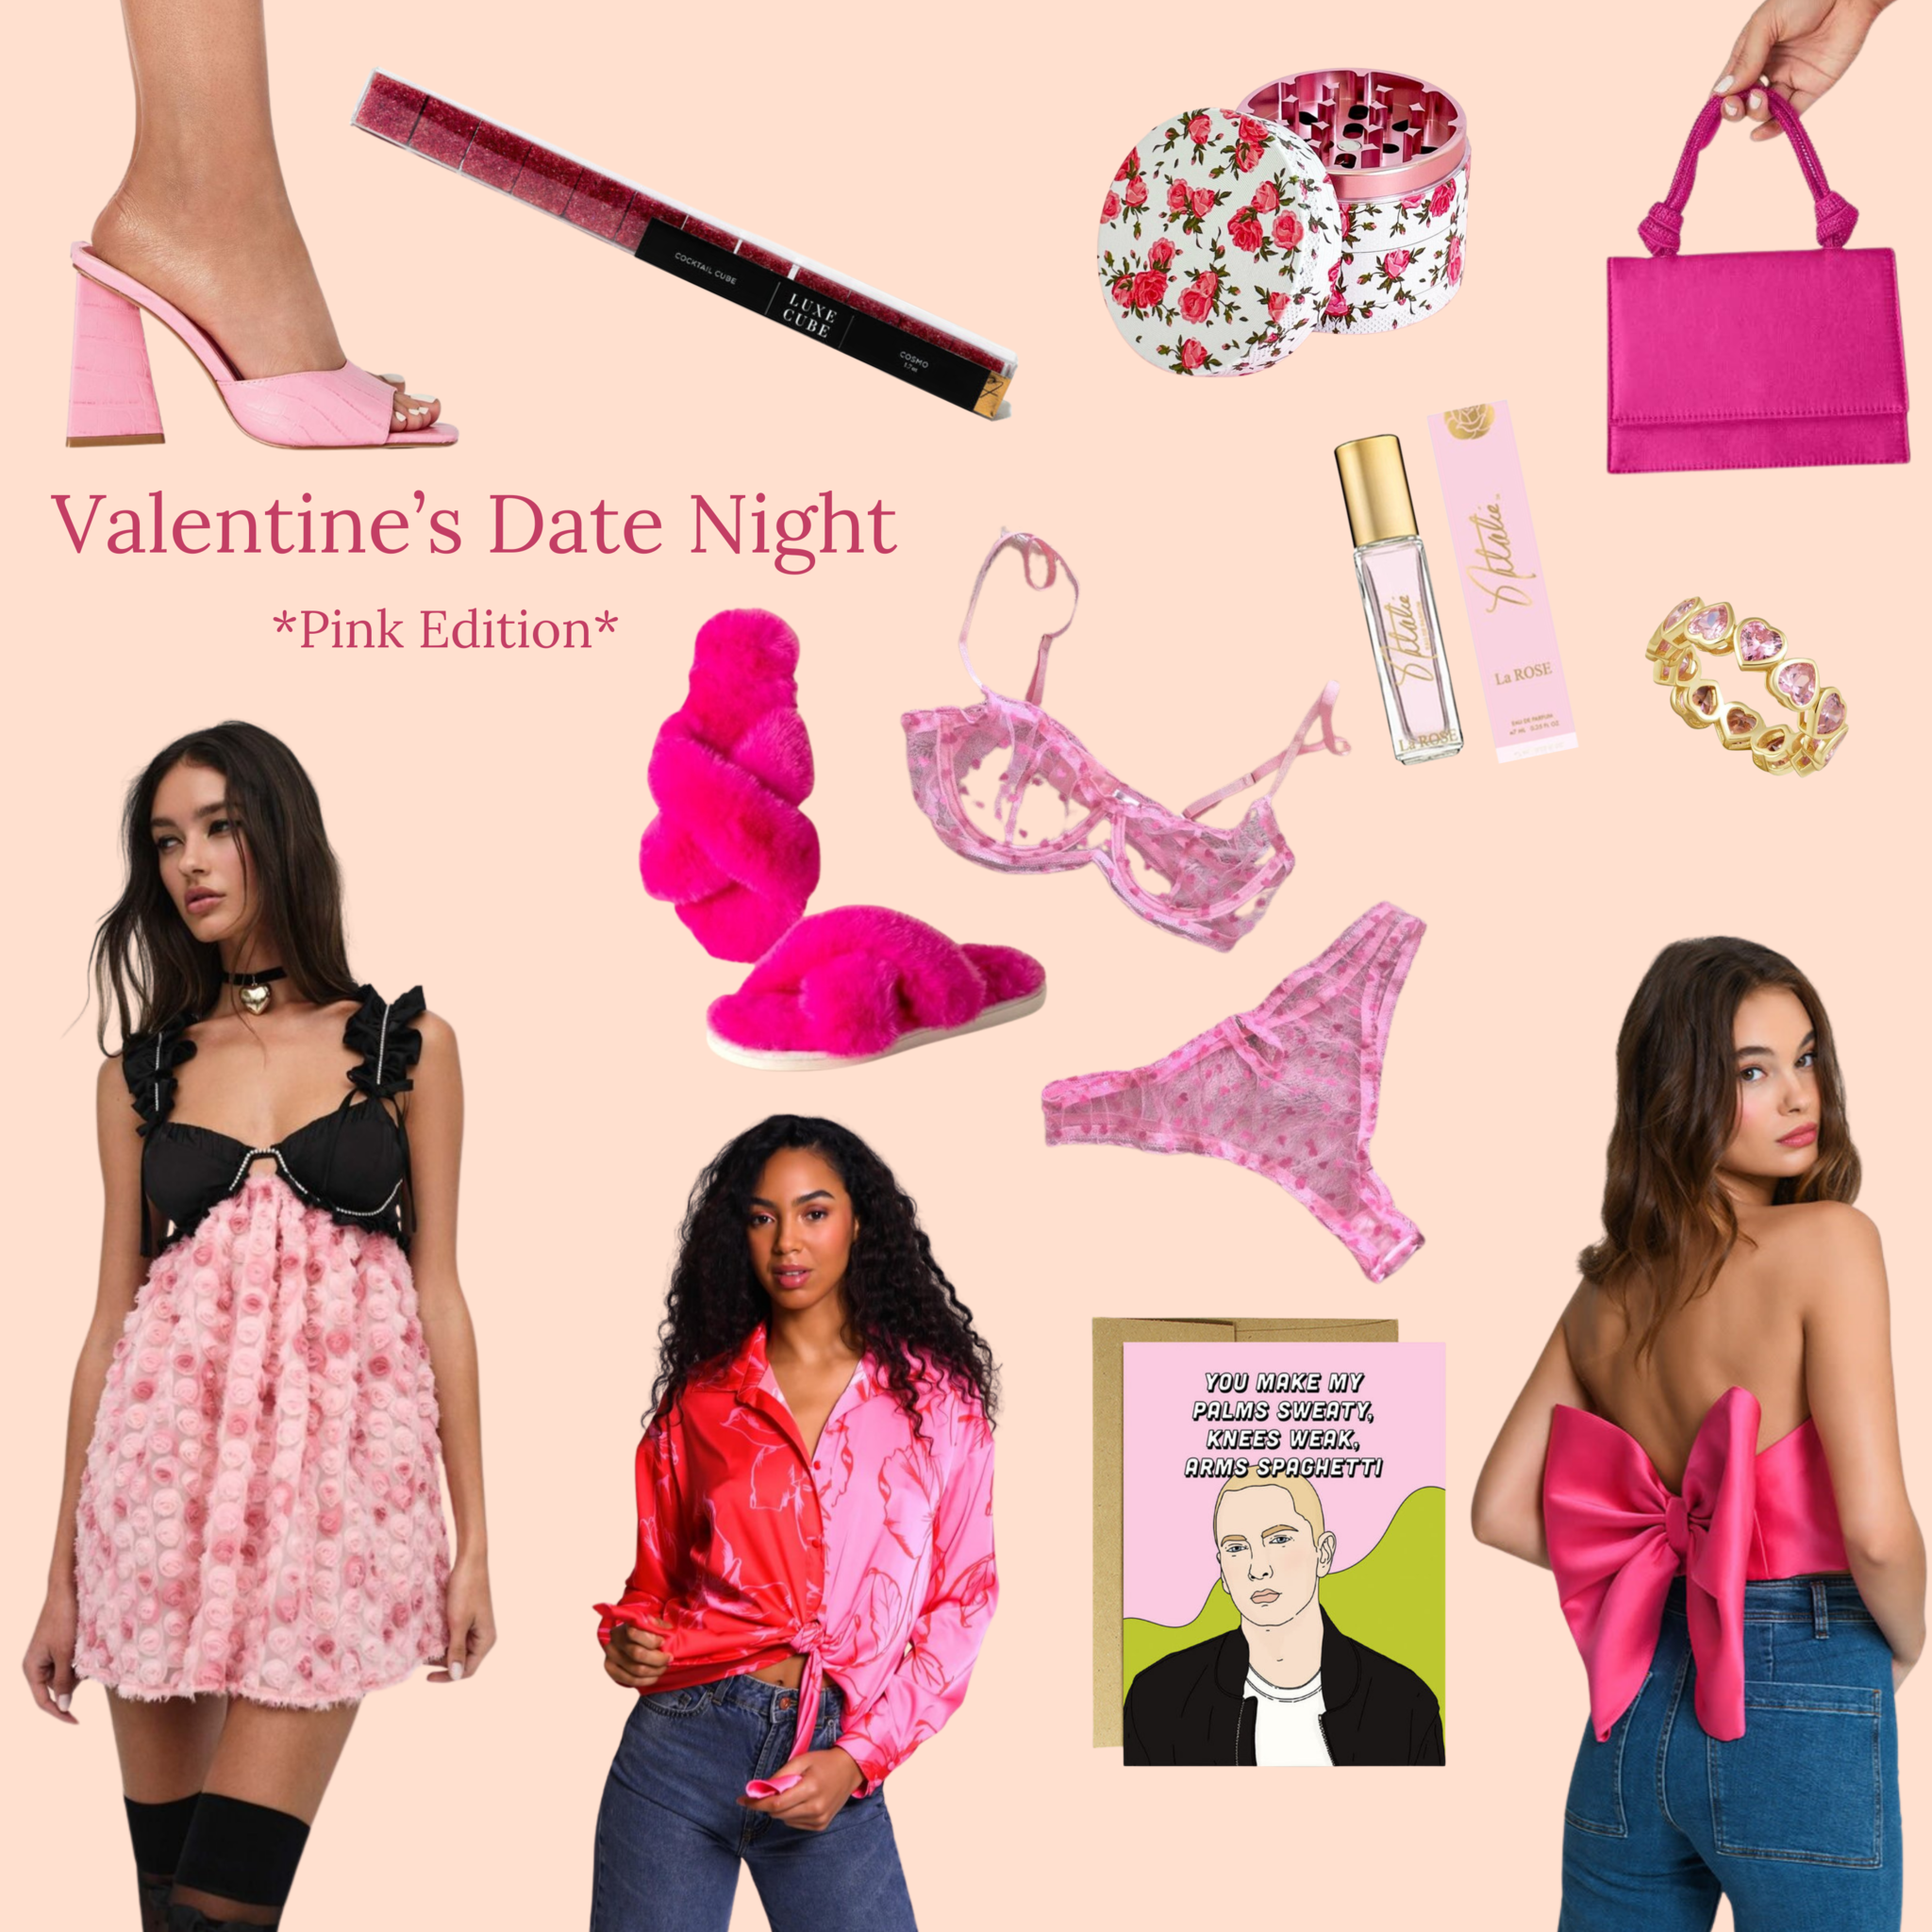 Why Pink Reigns Supreme as a Valentine's Day Color